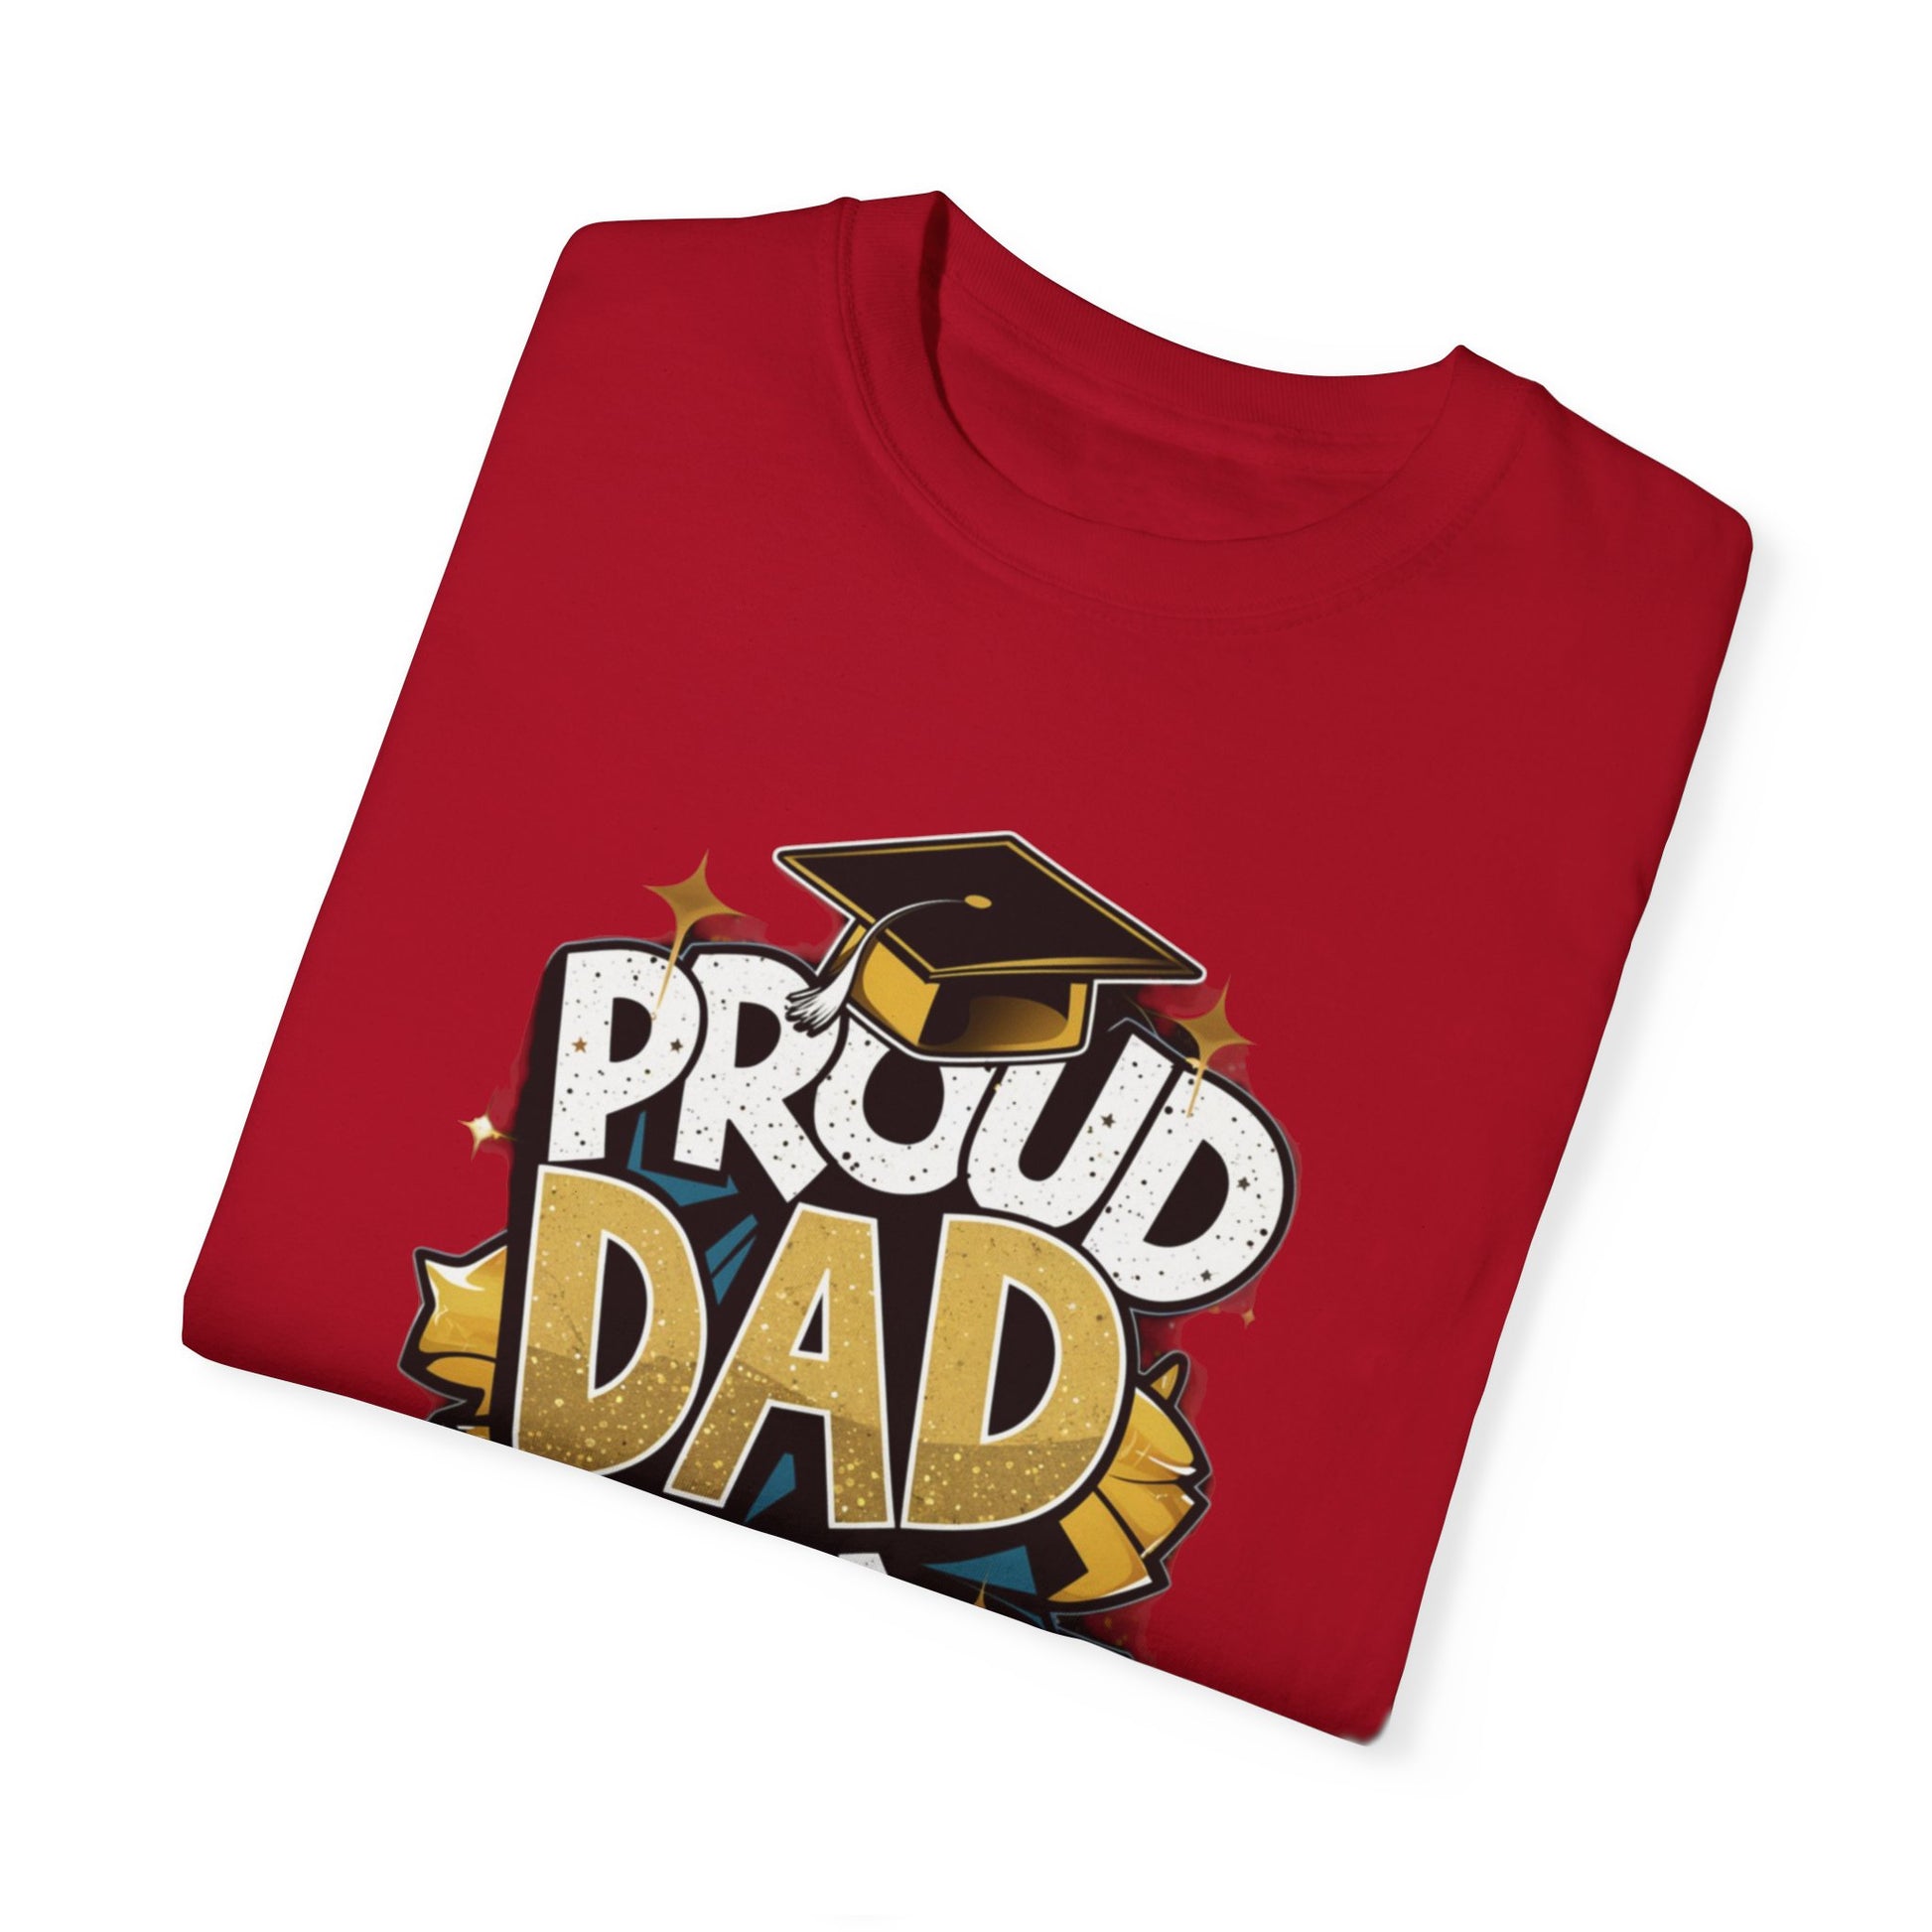 Proud Dad of a 2024 Graduate Unisex Garment-dyed T-shirt Cotton Funny Humorous Graphic Soft Premium Unisex Men Women Red T-shirt Birthday Gift-20